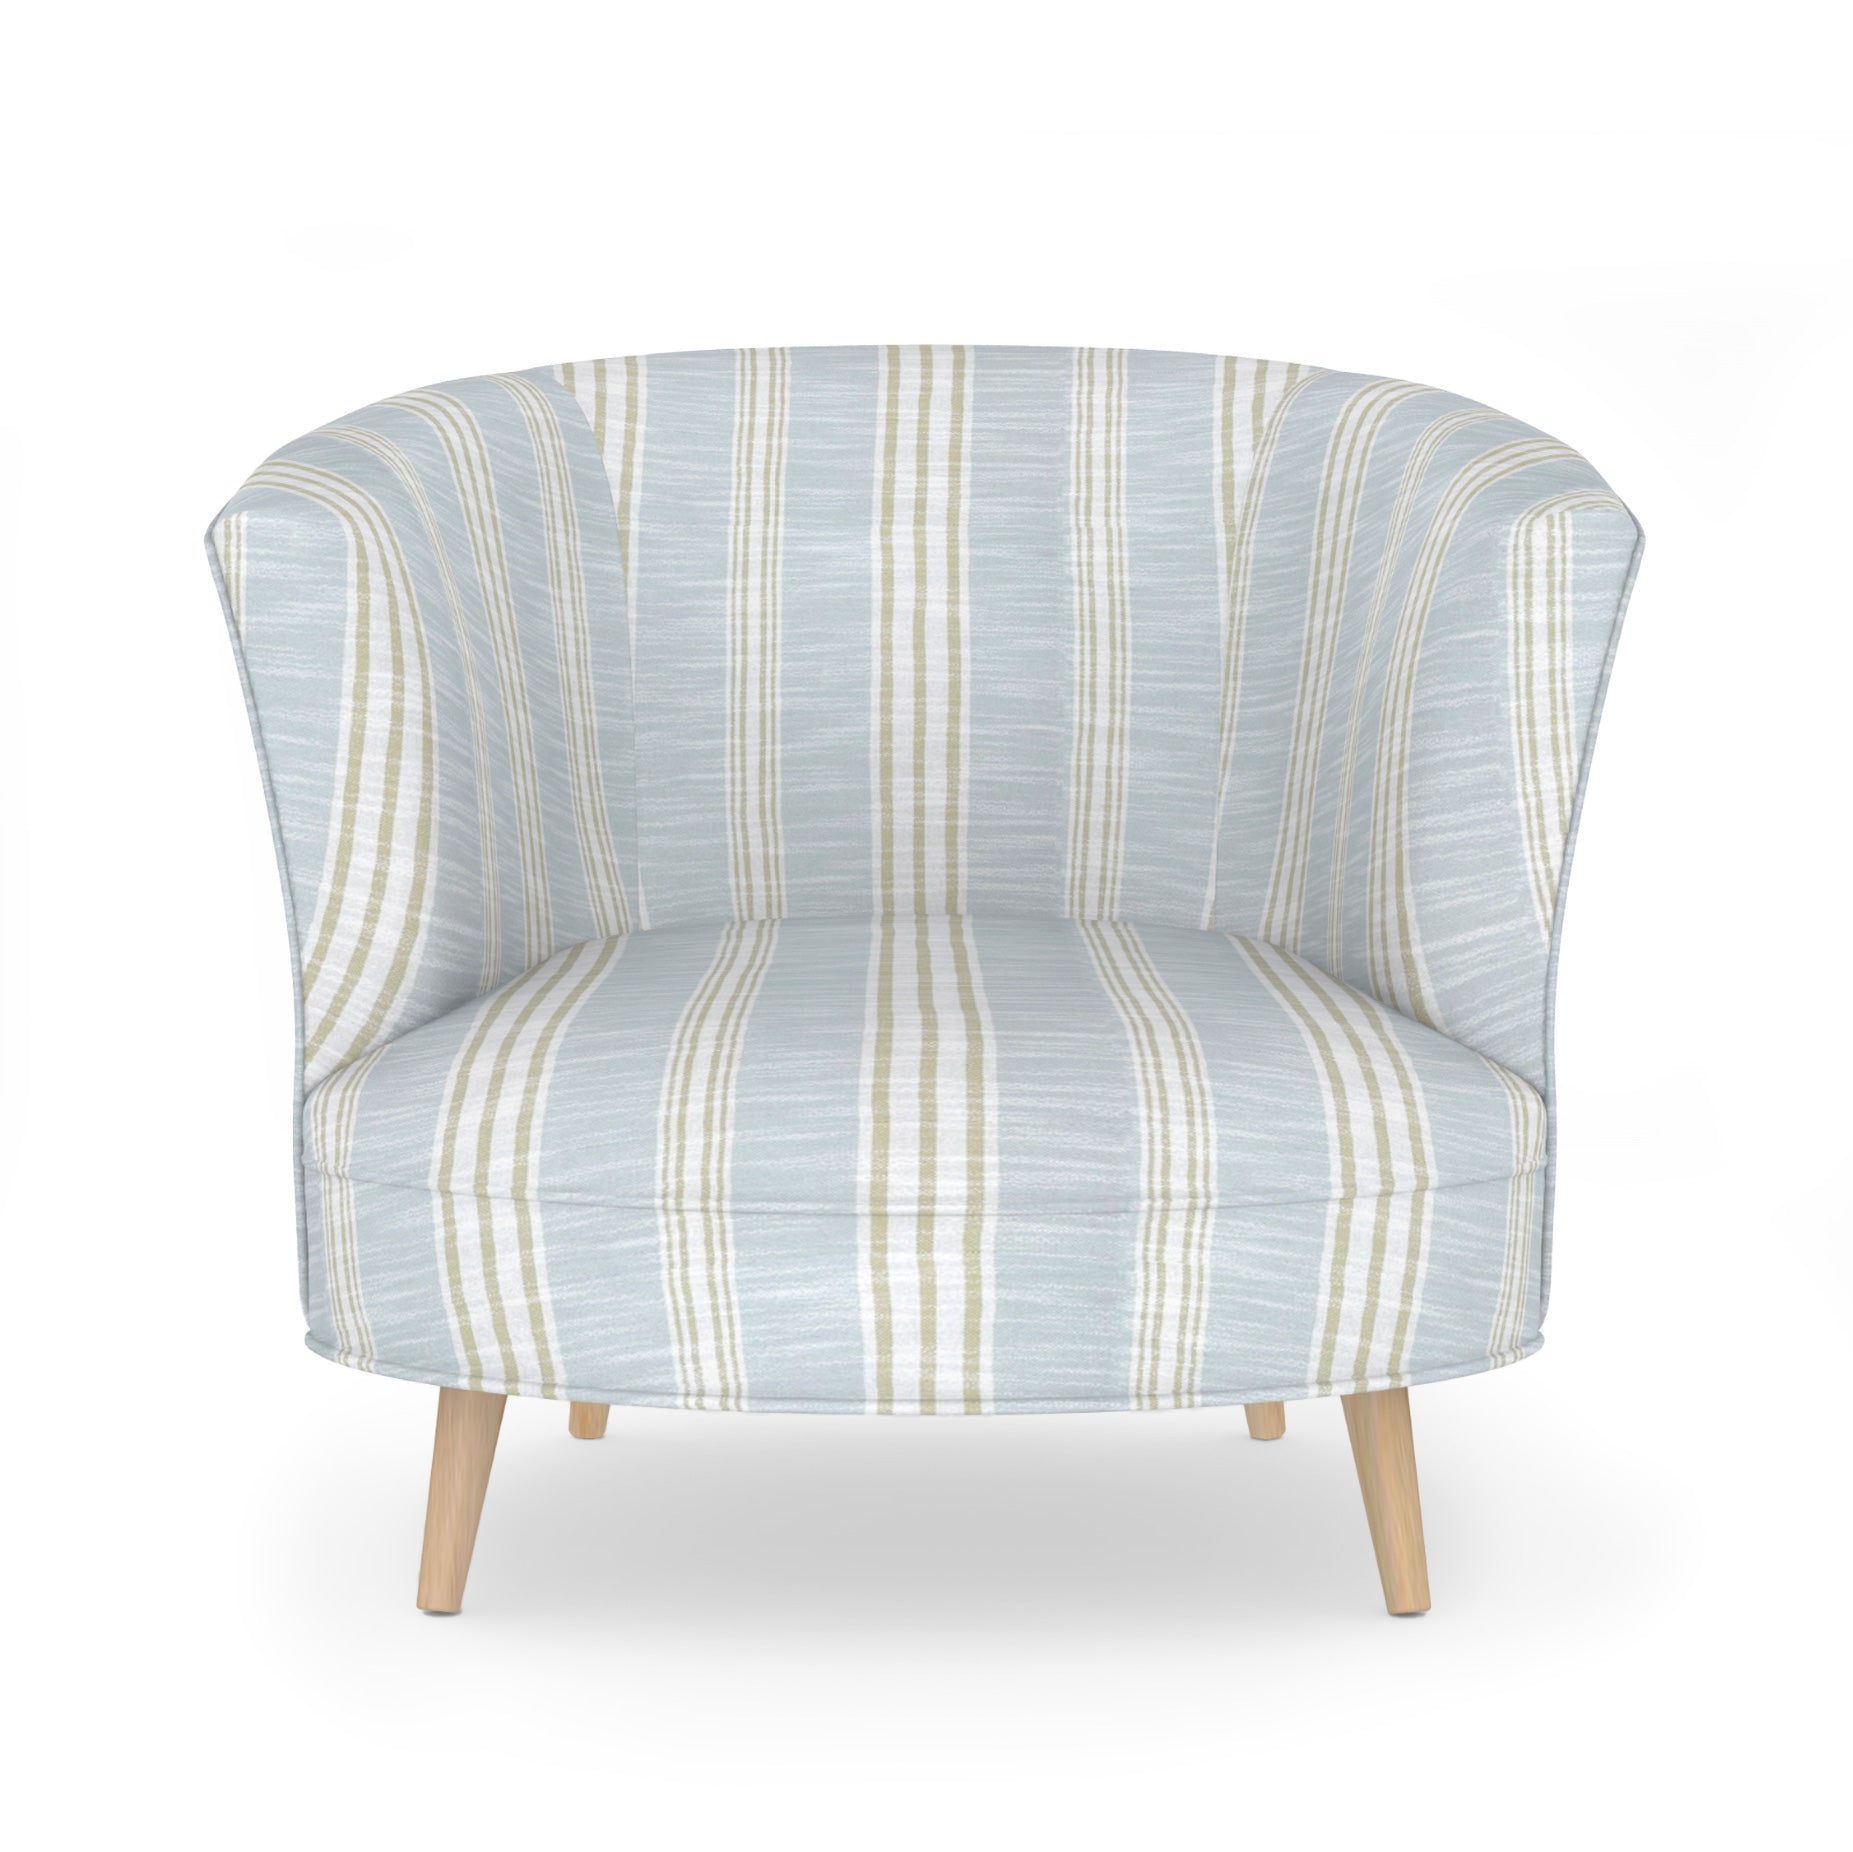 Maine Cottage Gretchen Chair  | Upholstered Chairs | Maine Cottage® 